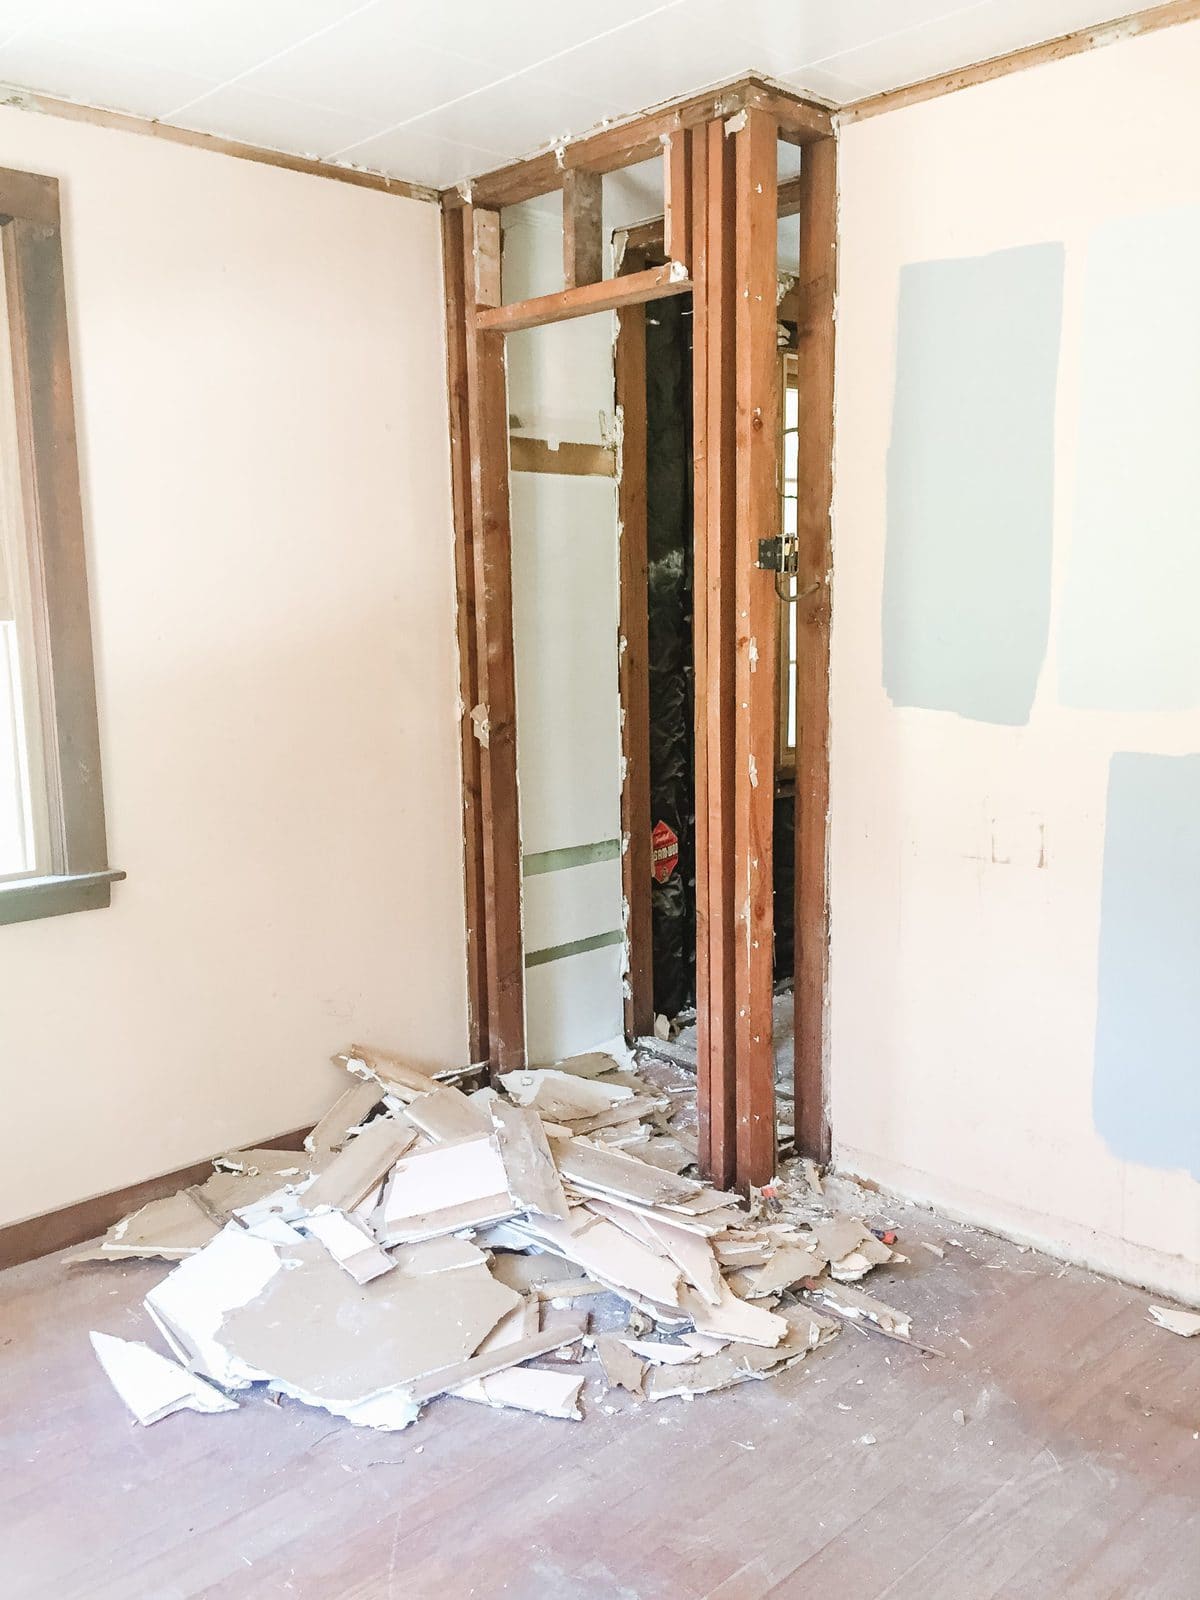 Demolition of the second closet in the old master bedroom during renovation